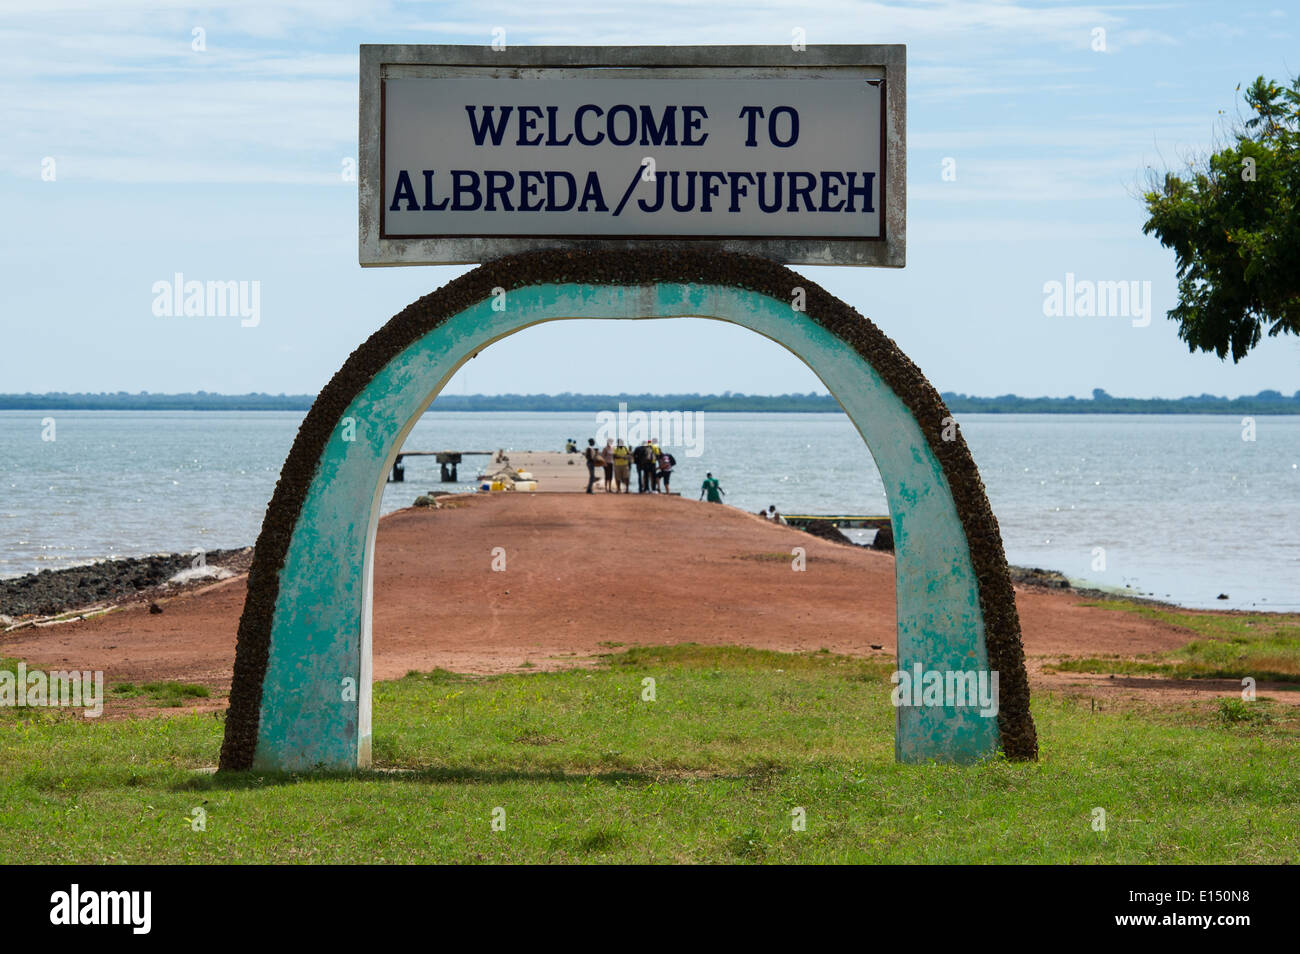 Entrance from the jetty on the Gambia River to the villages Juffureh and Albreda, the Gambia Stock Photo